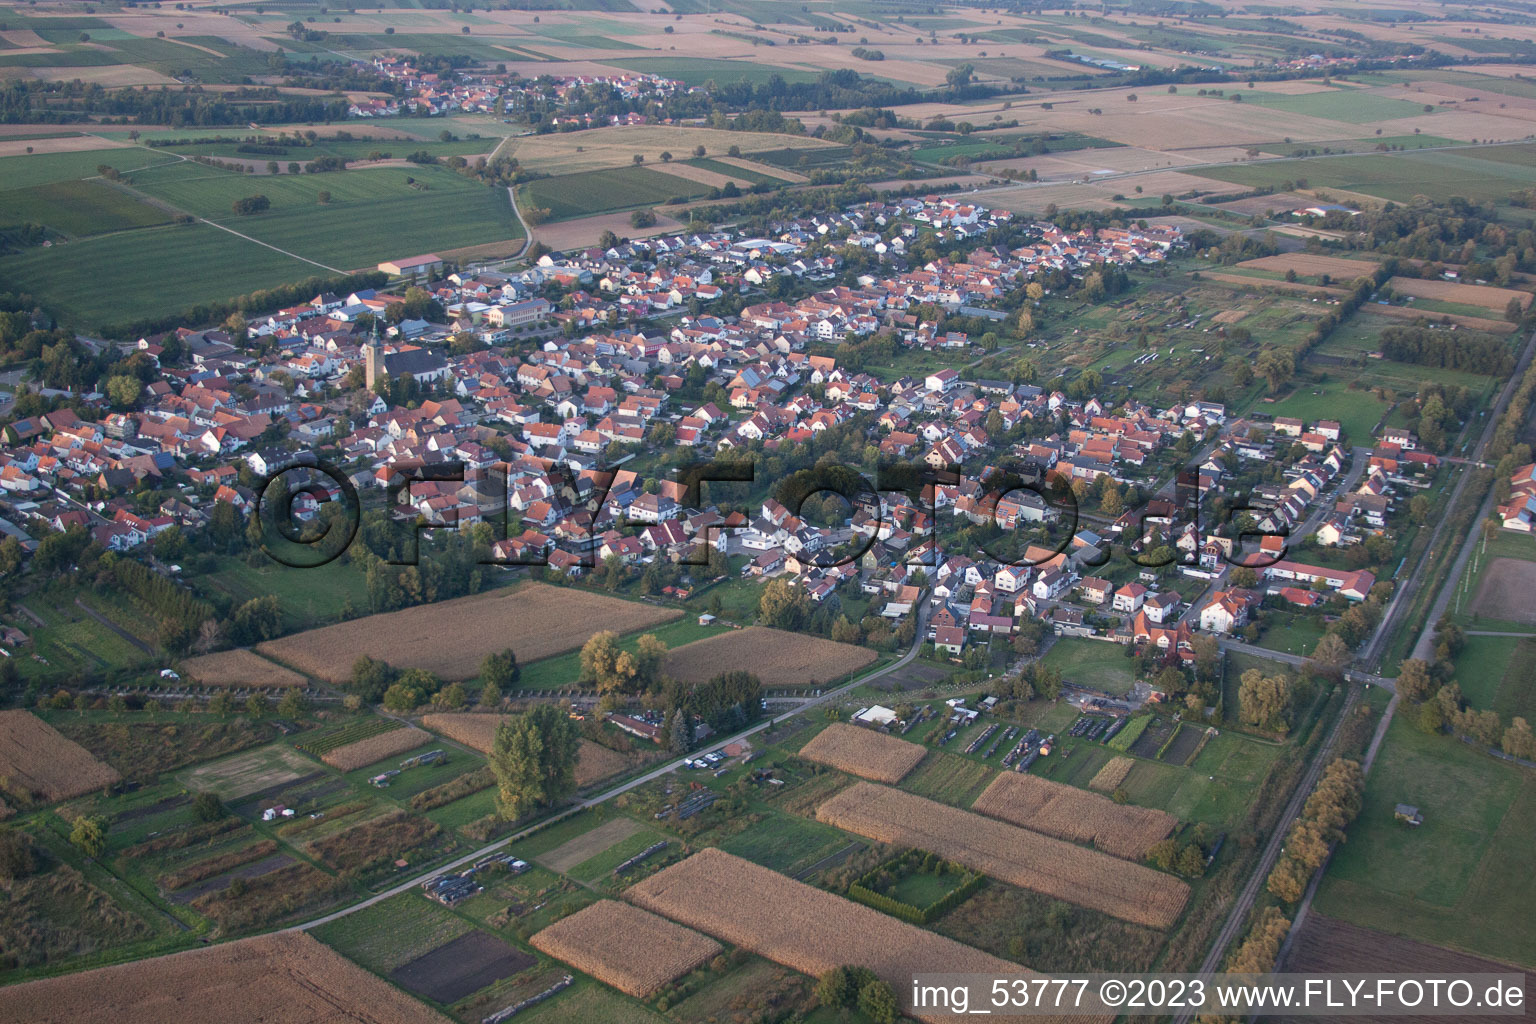 Aerial view of Kapsweyer in the state Rhineland-Palatinate, Germany